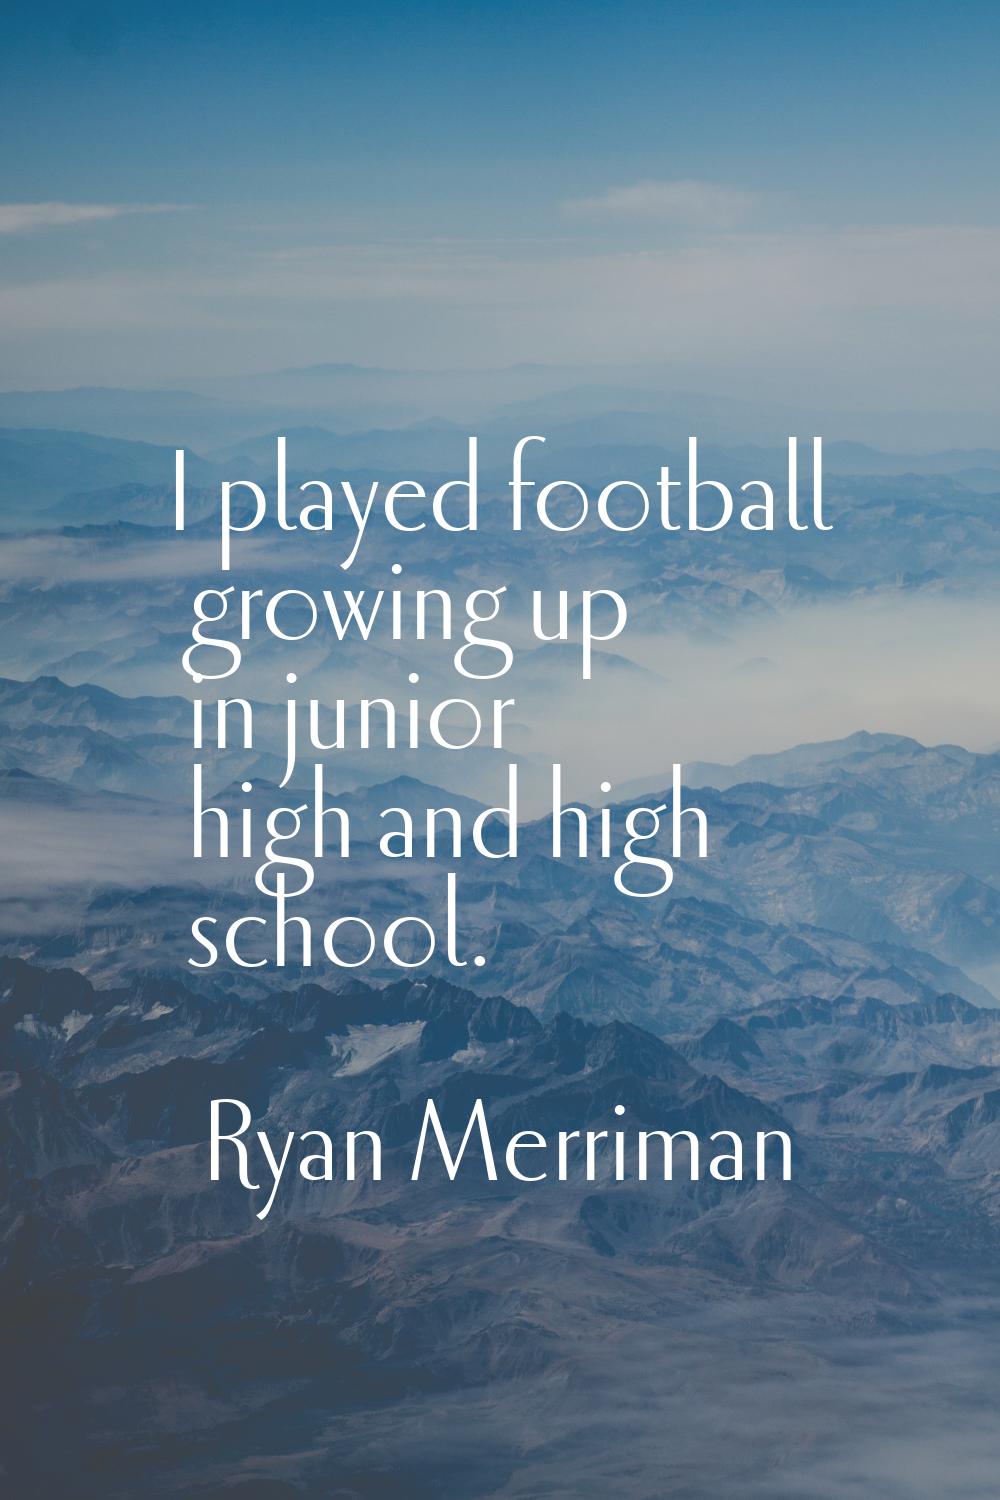 I played football growing up in junior high and high school.